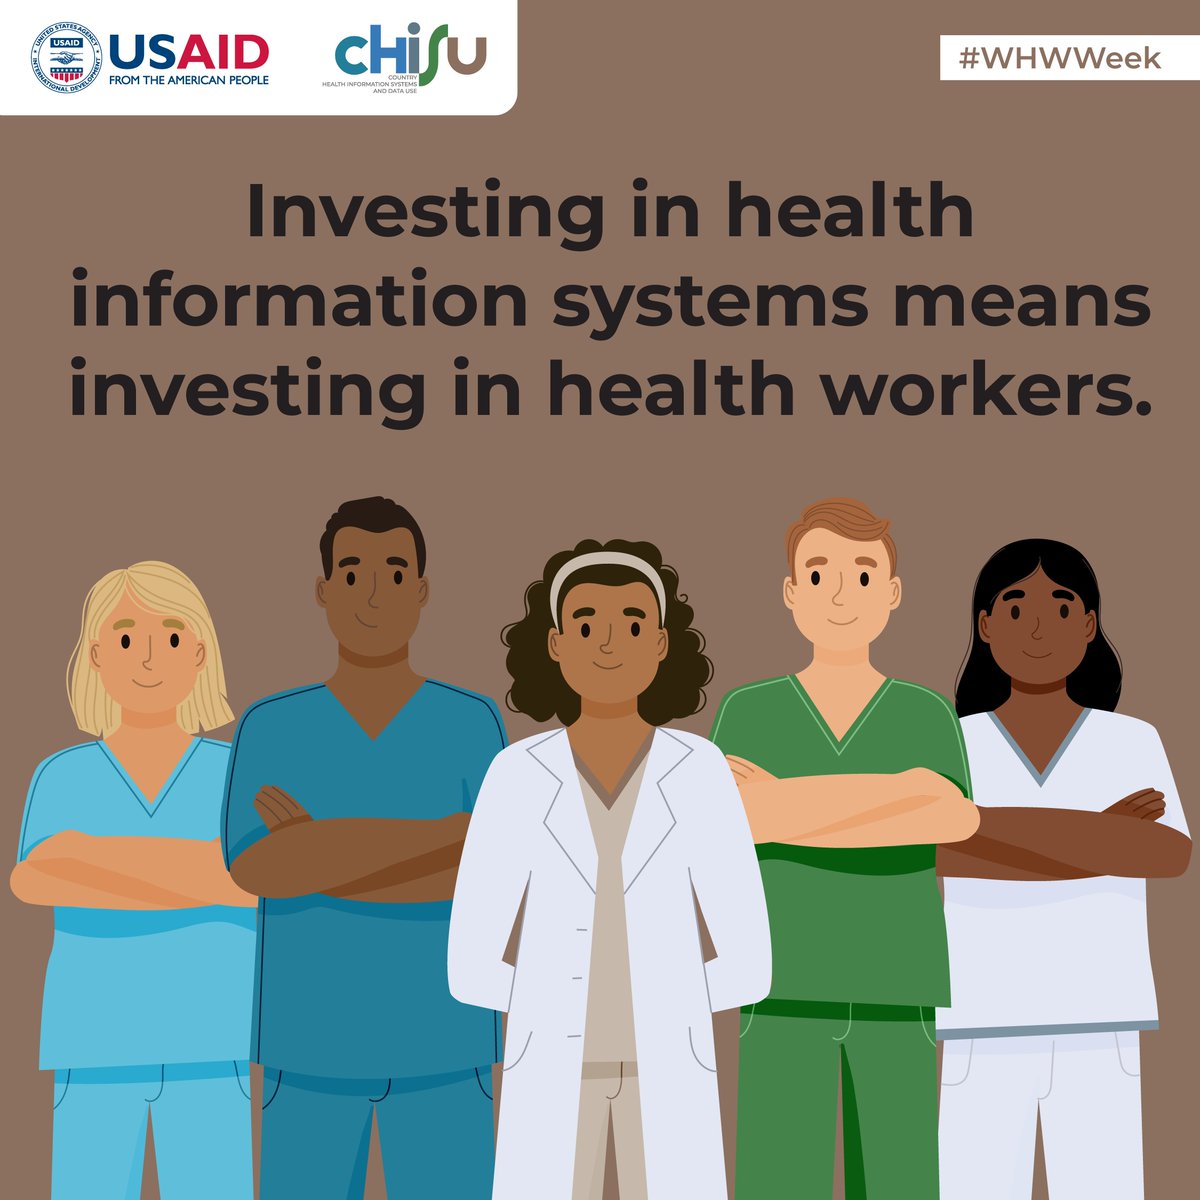 By investing in #HealthInformationSystems, we’re also investing in #SafeSupportedHealthWorkers so that they have access to quality data for improved decision making—which will ultimately help them achieve better health outcomes in the communities they serve #WHWWeek